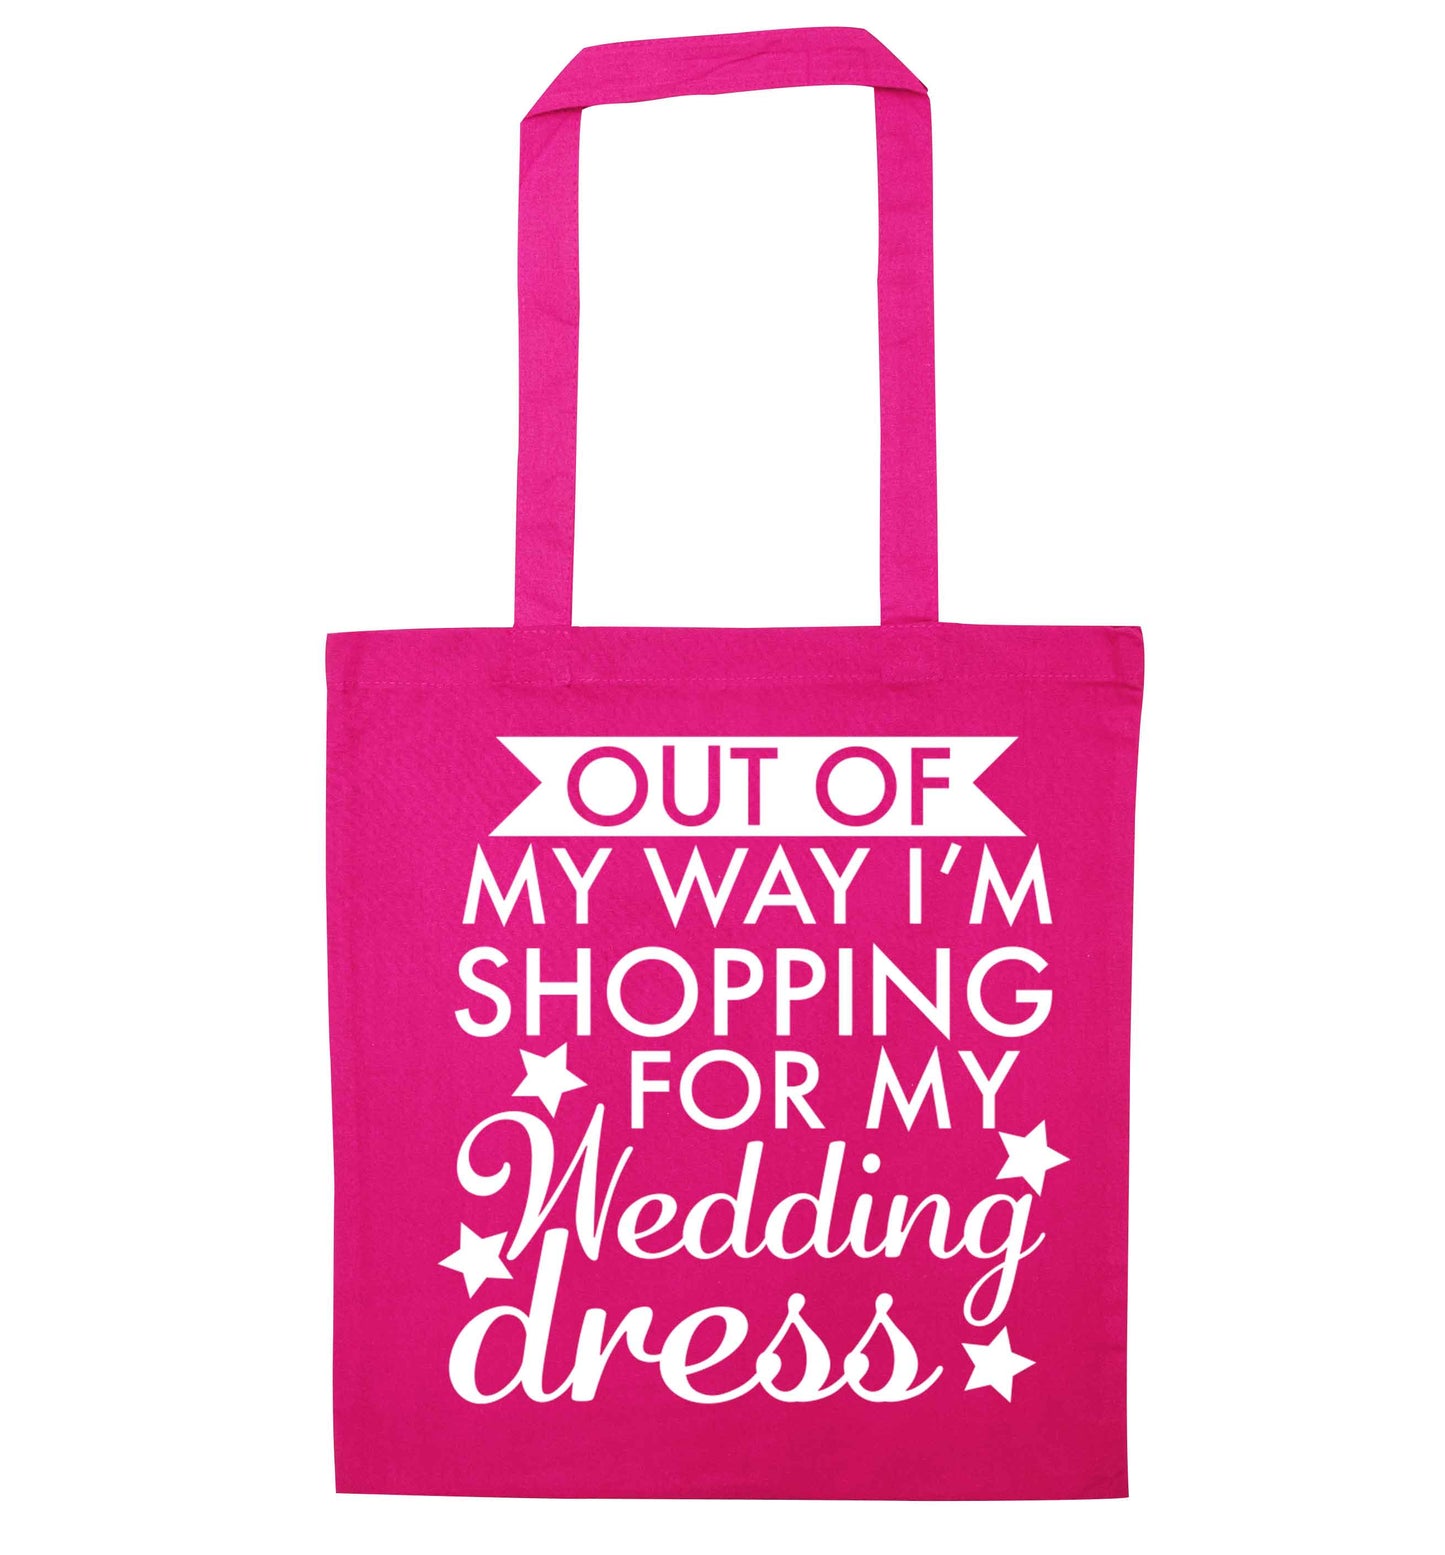 Out of my way I'm shopping for my wedding dress pink tote bag